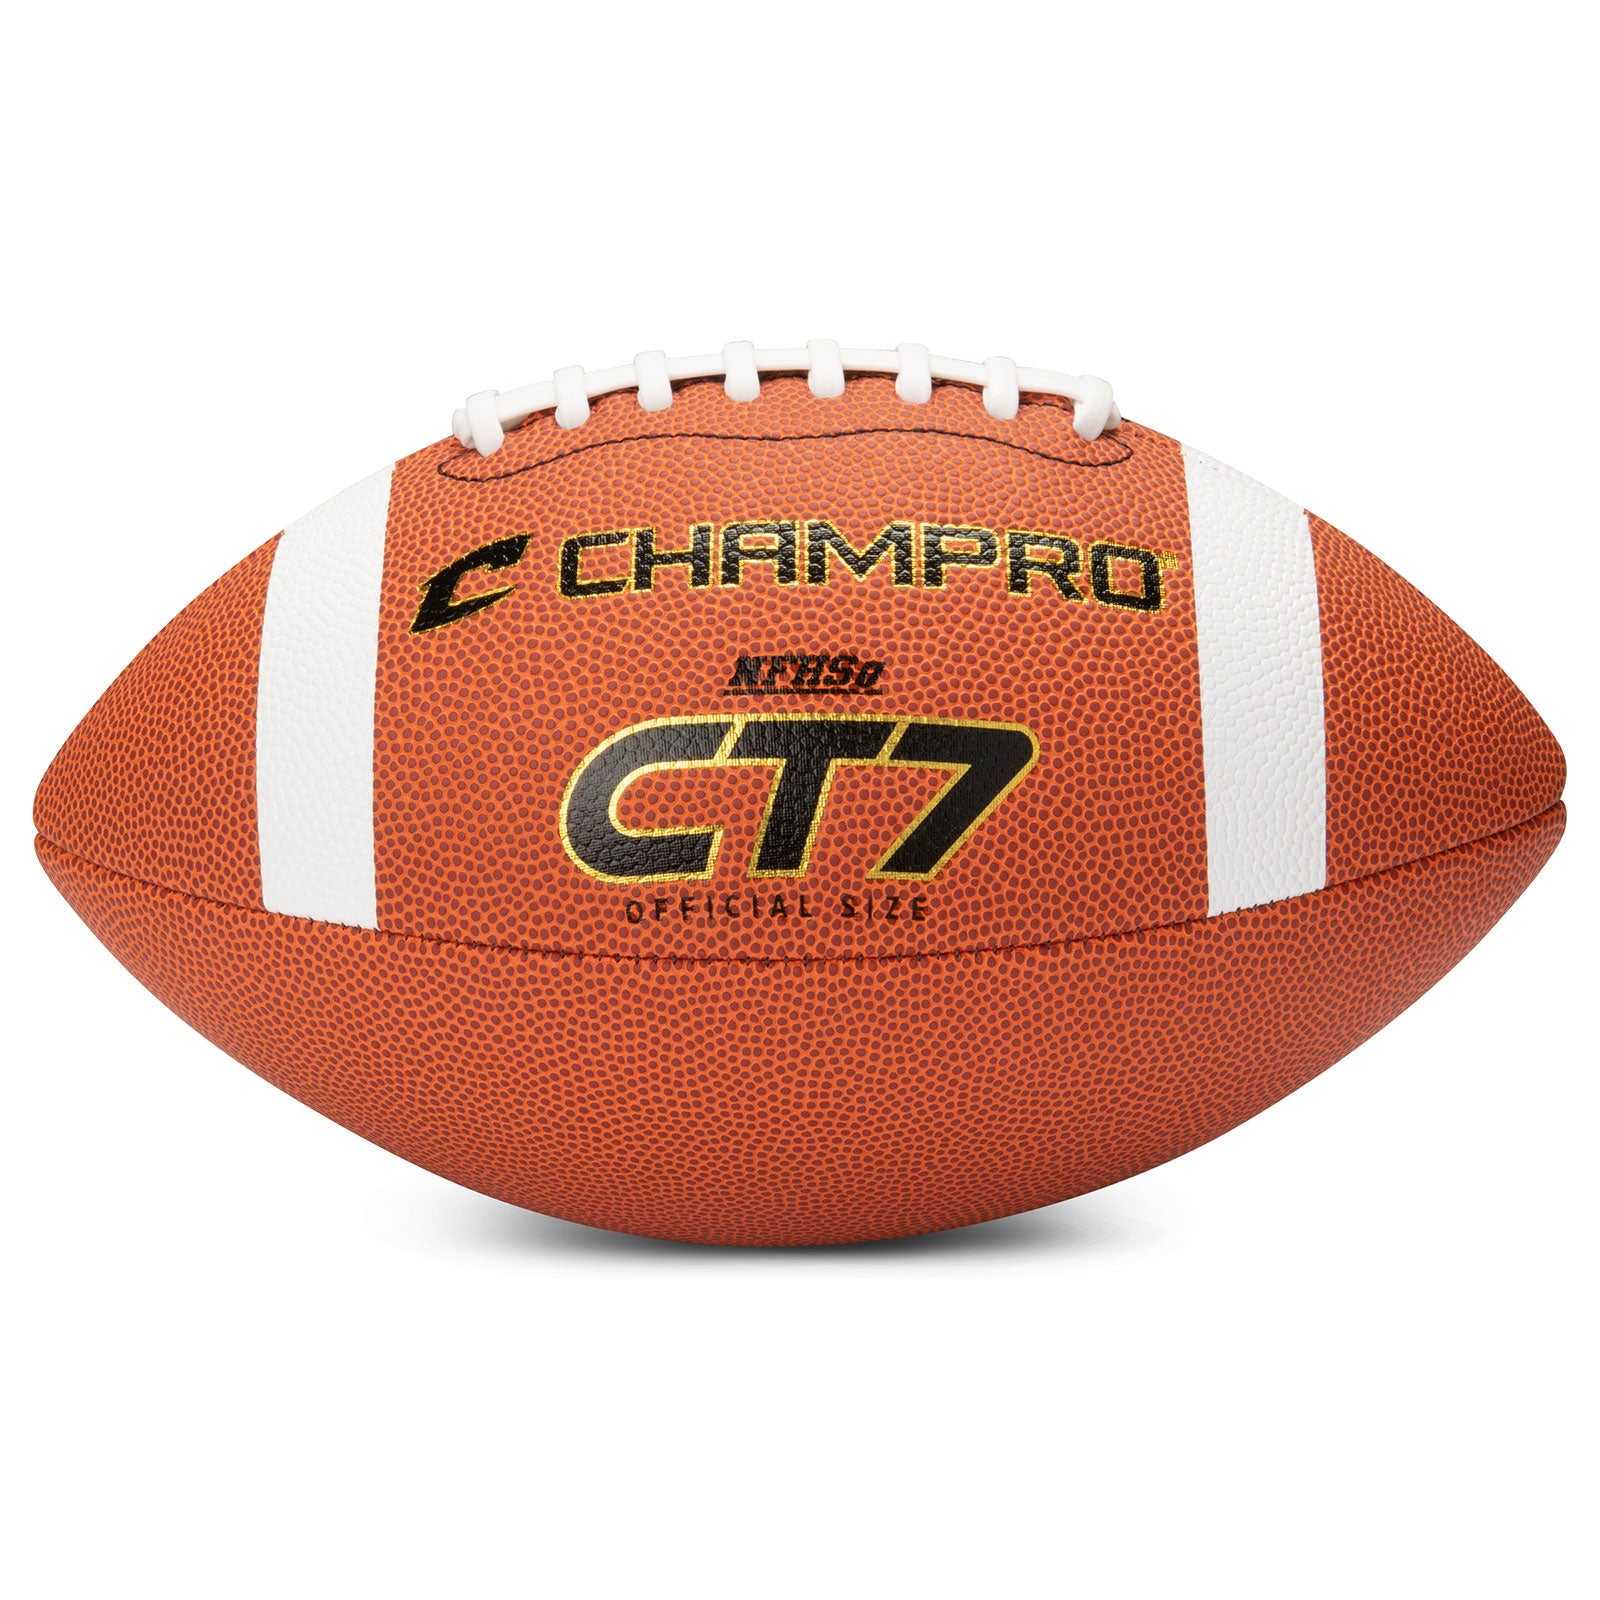 Champro FB7 CT7 "700" Composite Football - Tan White - HIT A Double